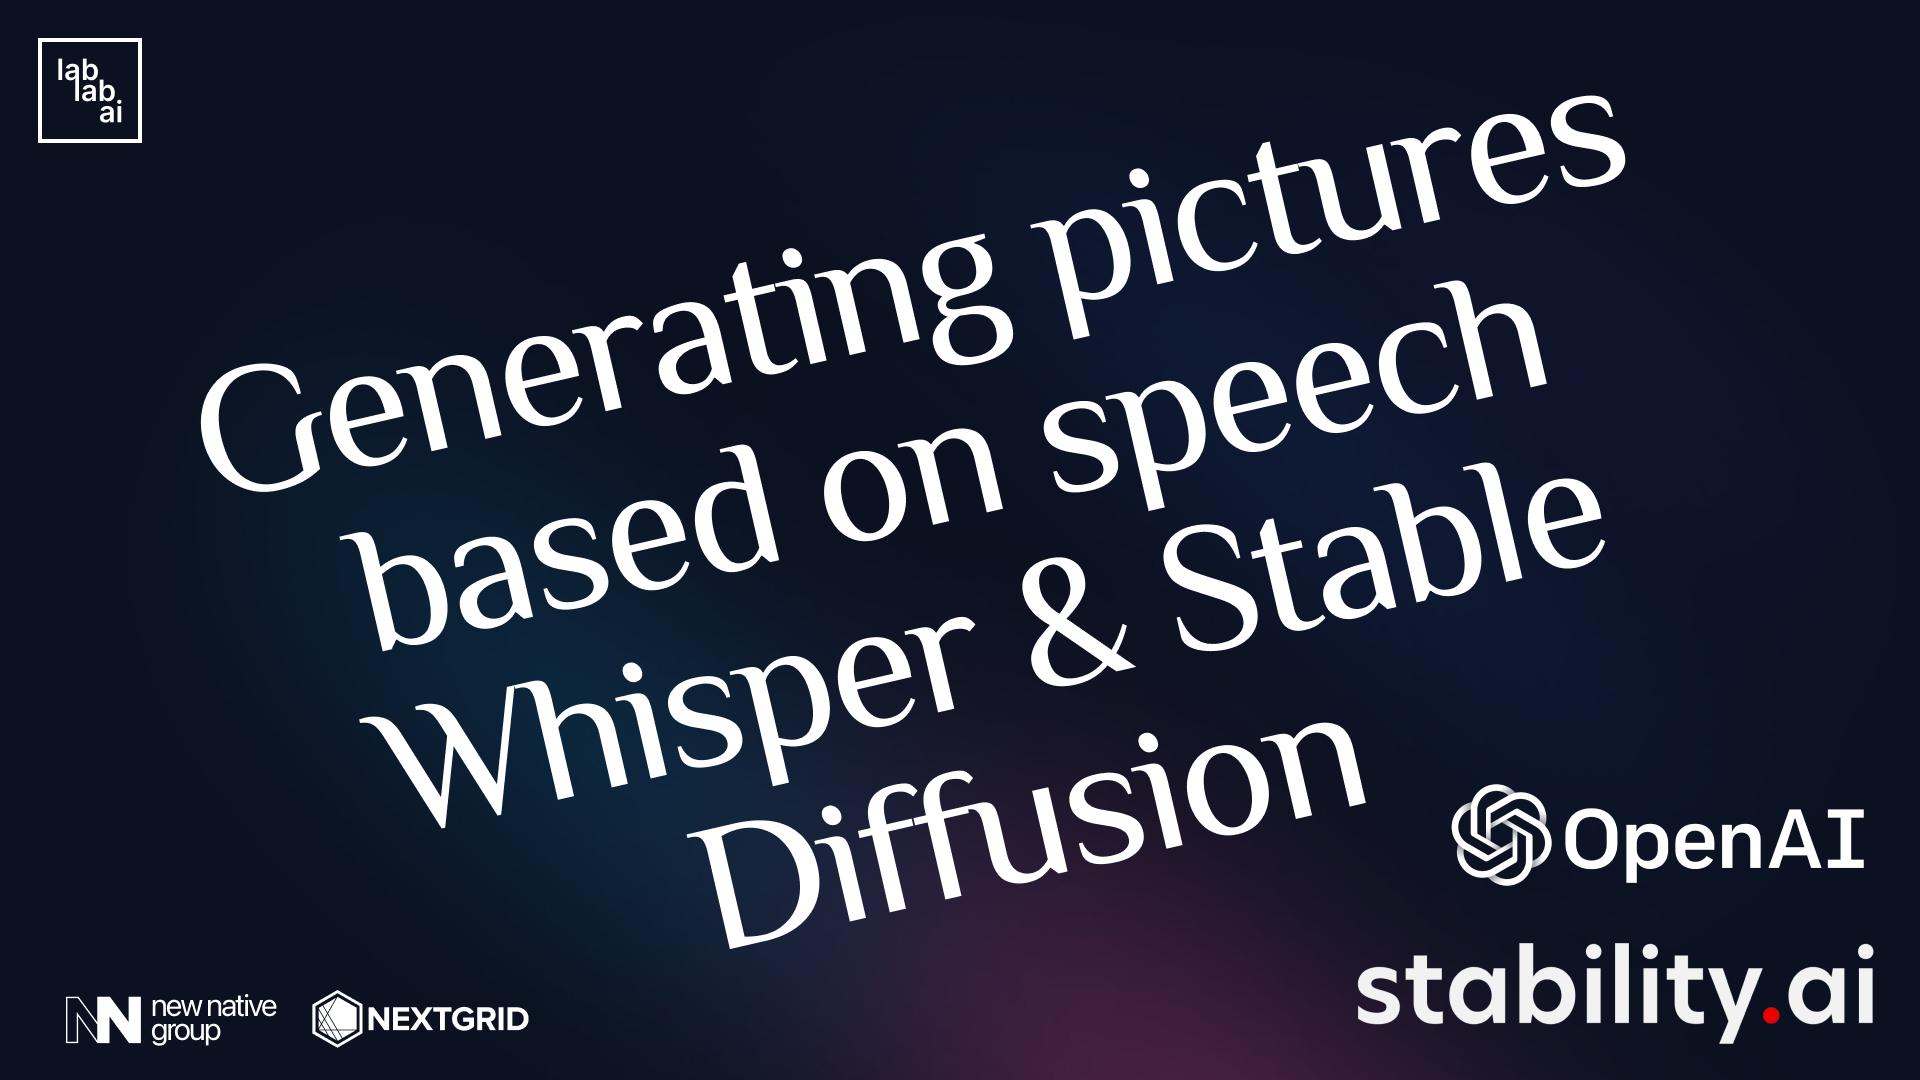 Generating pictures based on speech - Whisper & Stable Diffusion tutorial